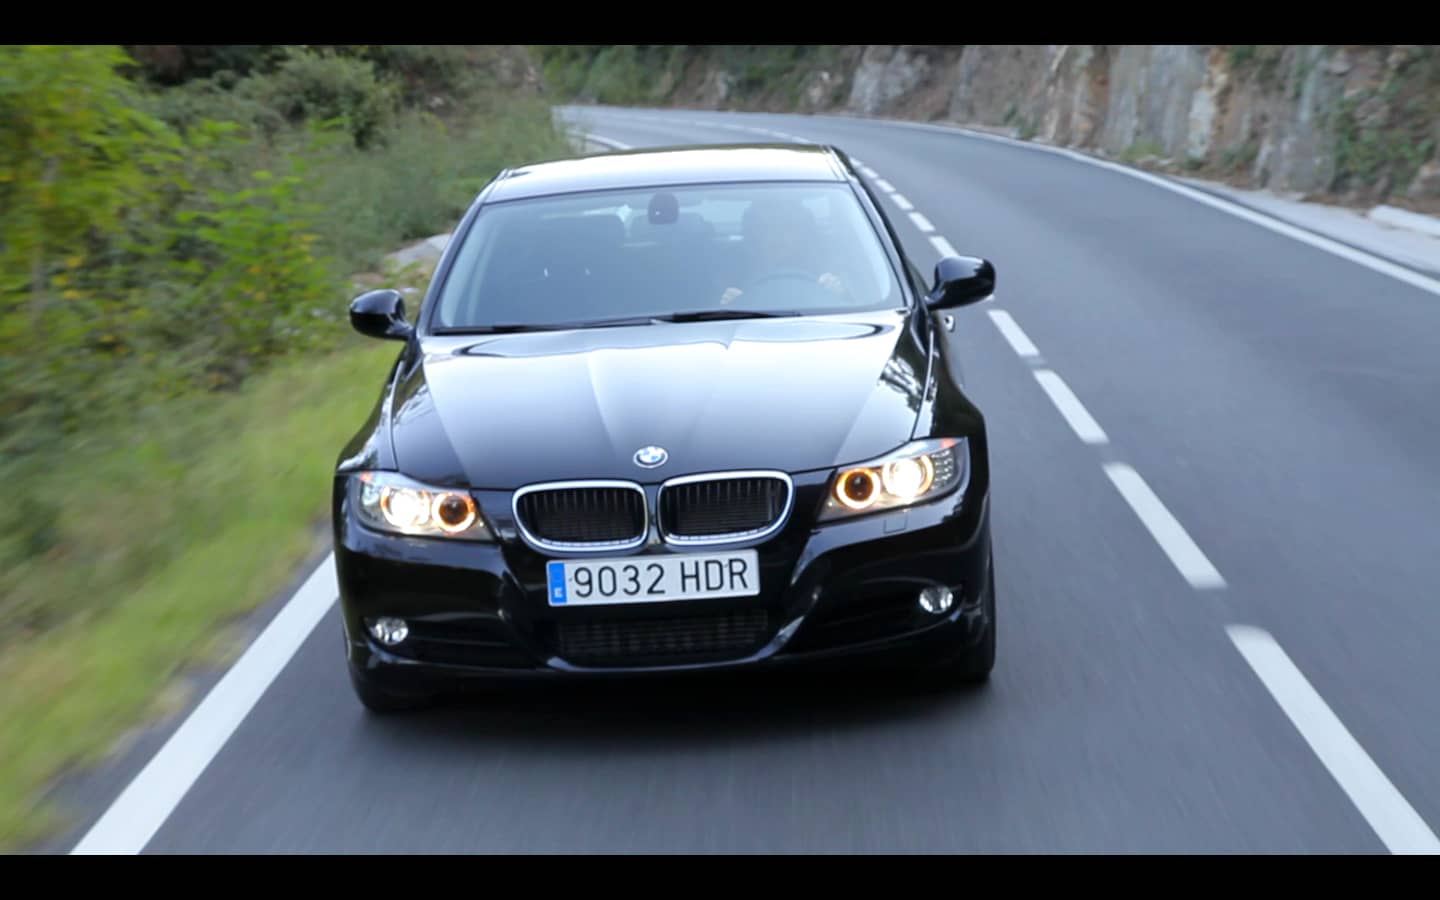 black car on the road close front view screenshot from a corporative advertisement video